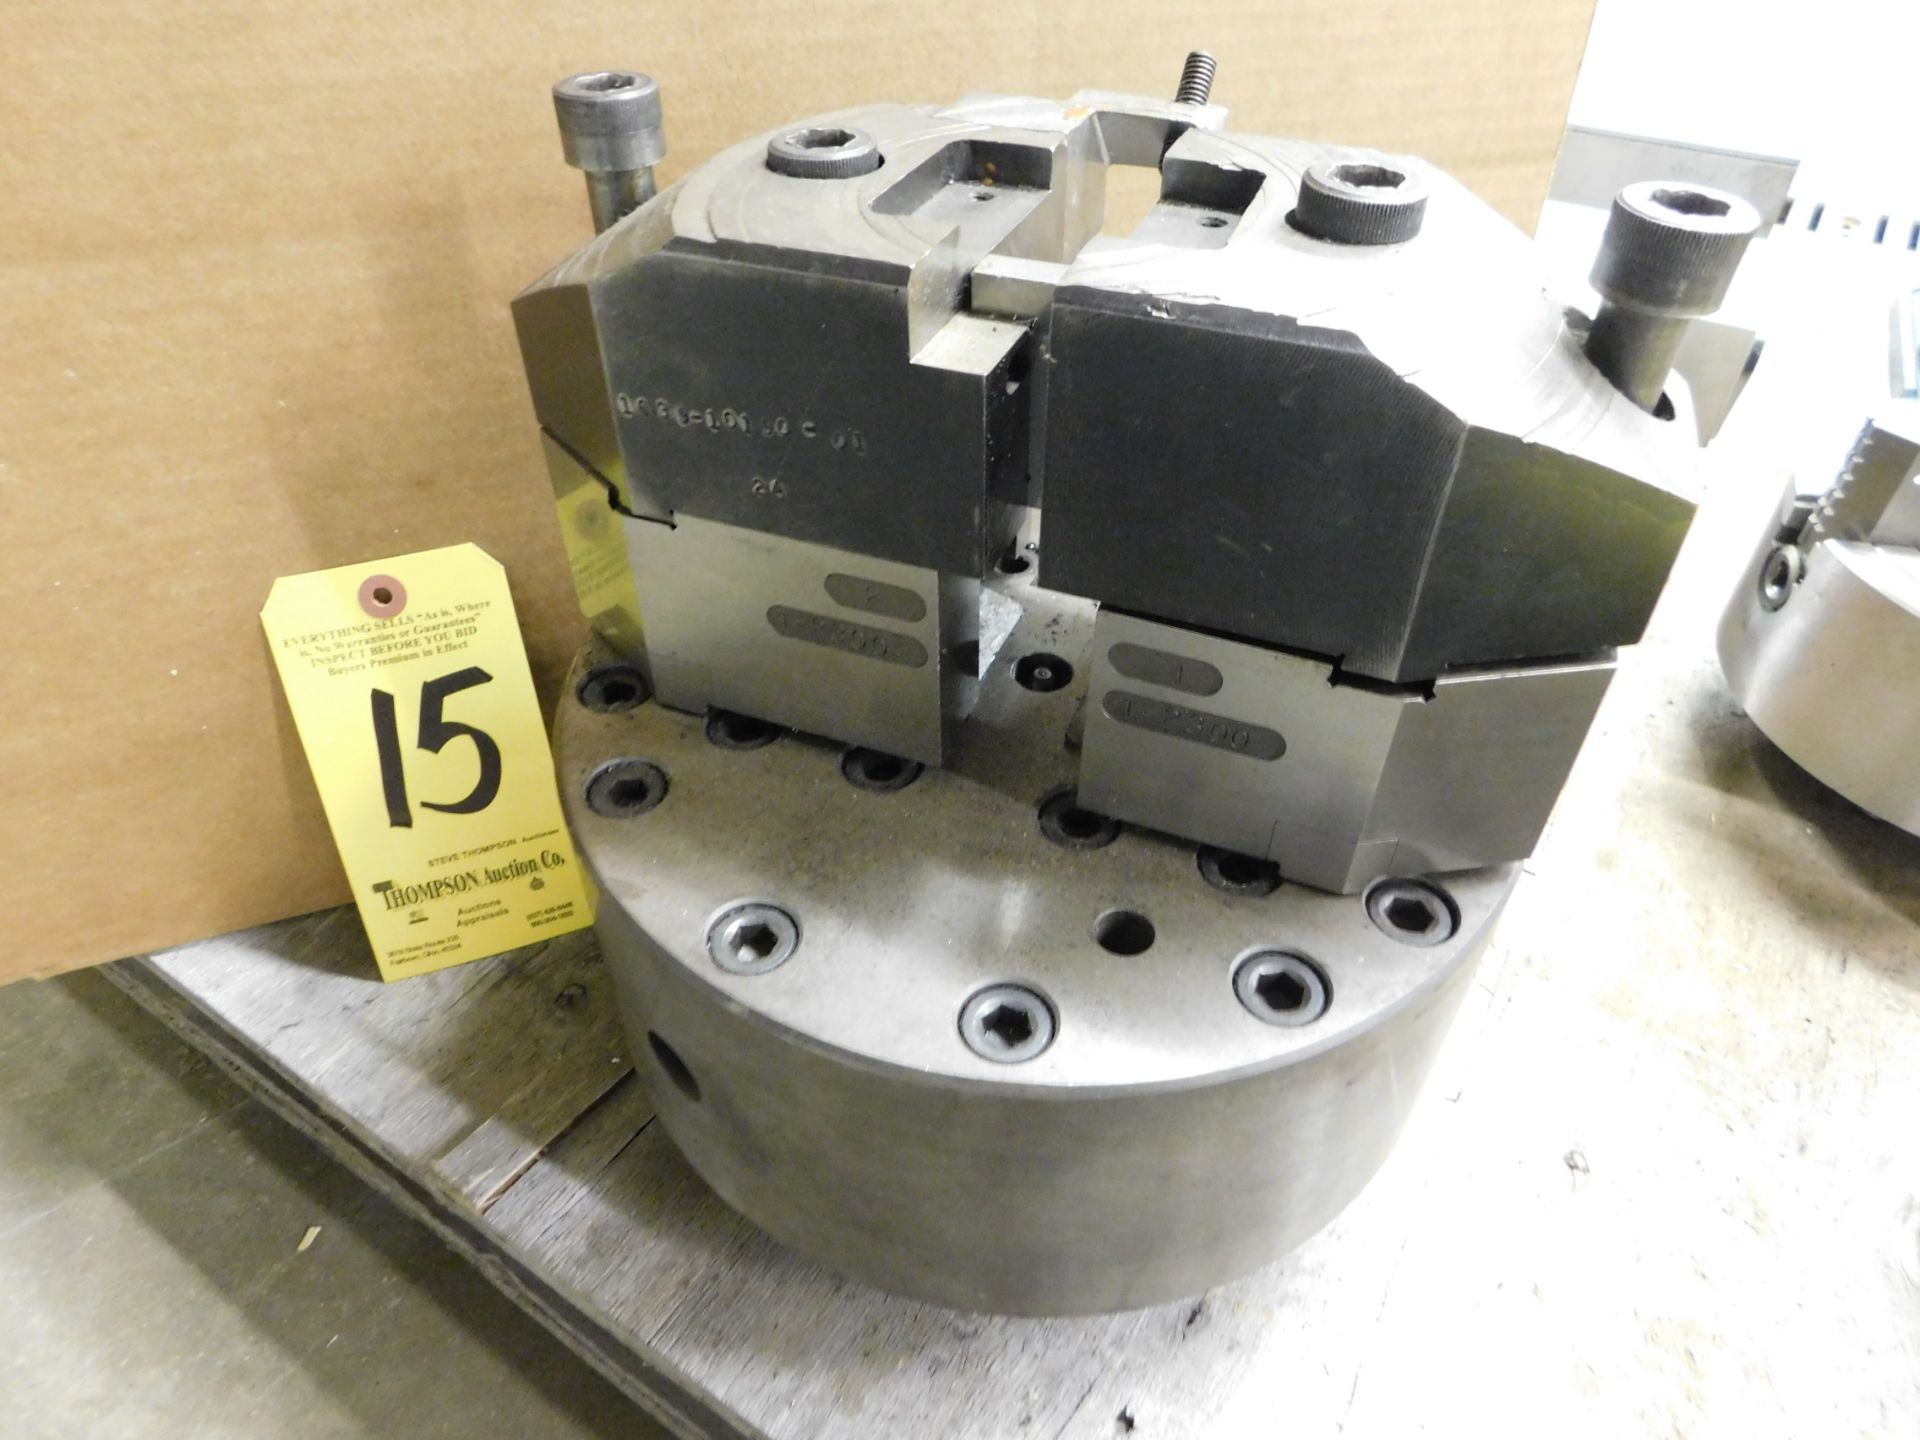 Royal 10" 2-Jaw Chuck, D1-6 Mount, Lot Location: 301 Poor Dr., Warsaw, IN, 46580